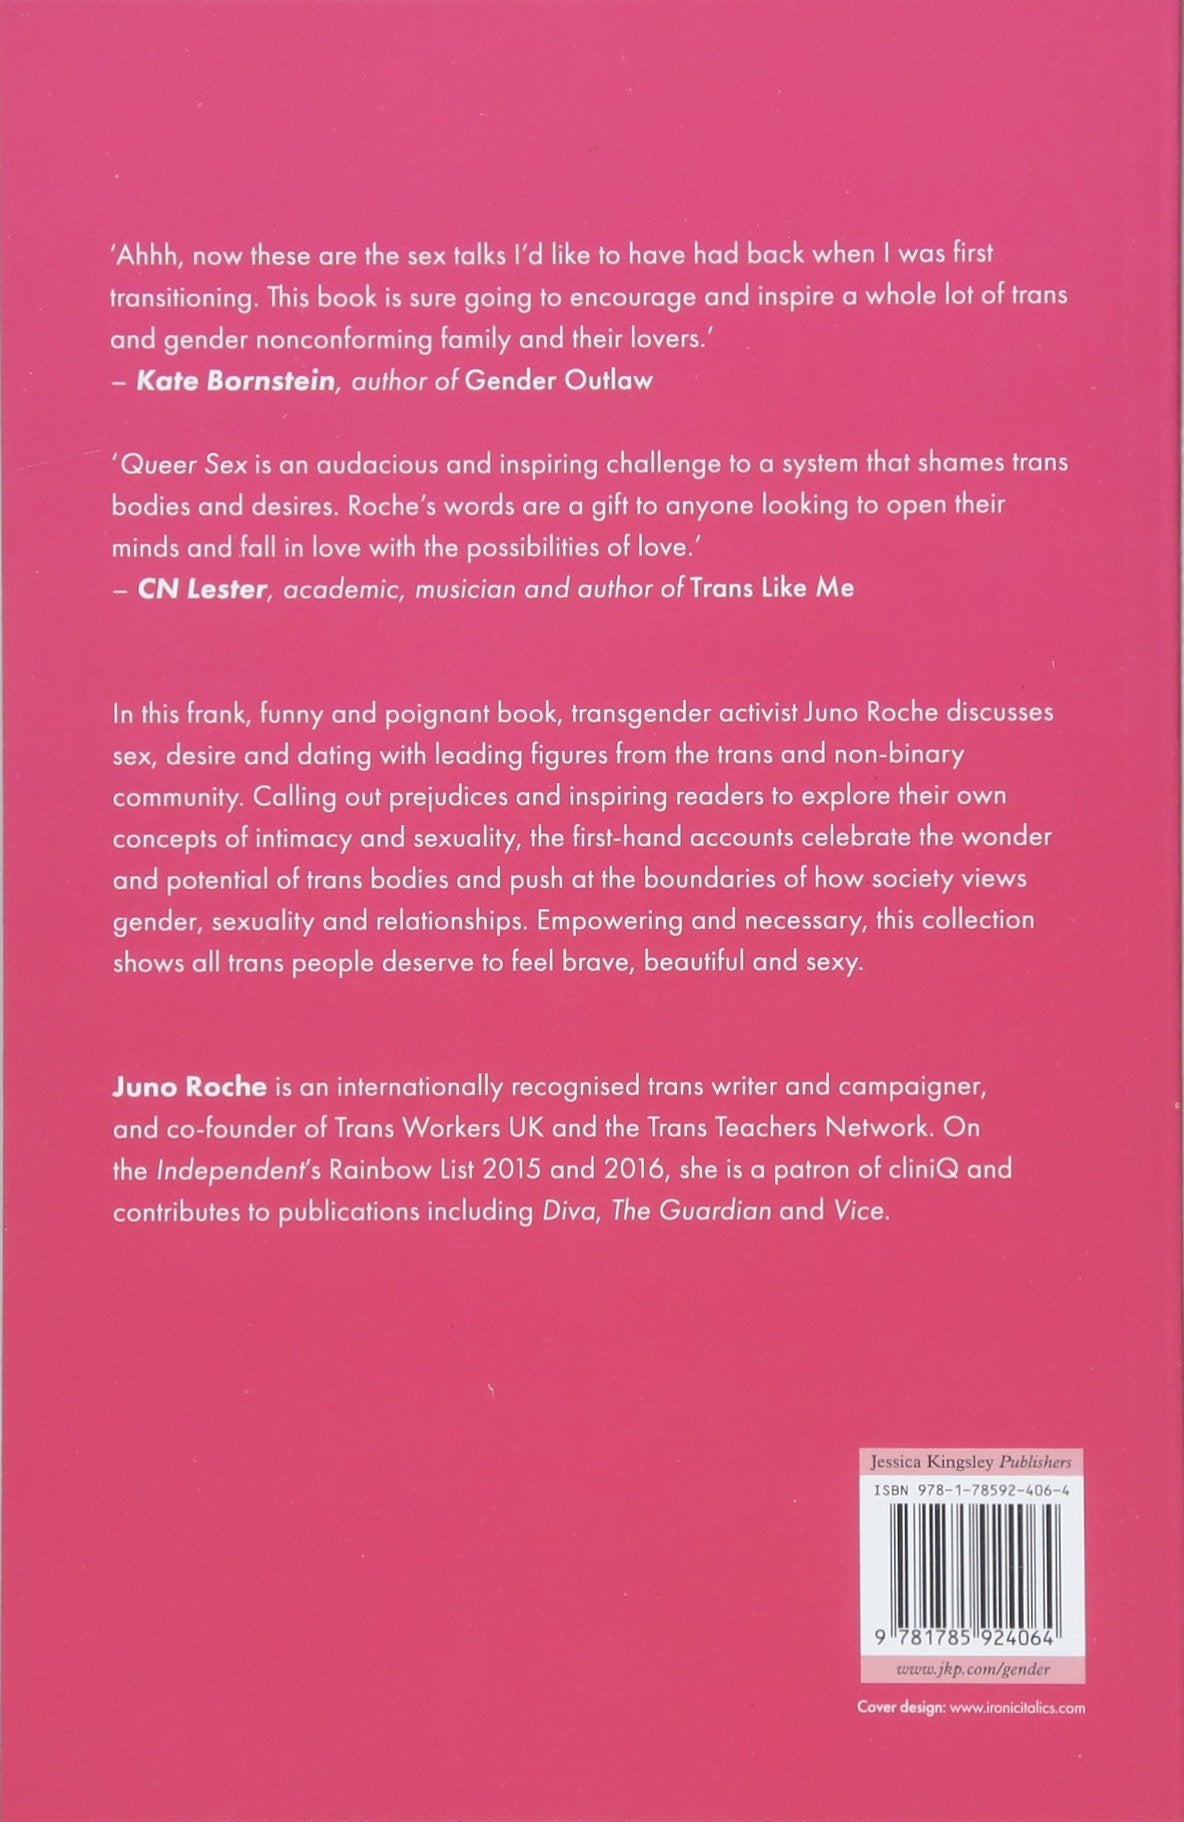 The back cover of Queer Sex: A Trans and Non-Binary Guide by Juno Roche